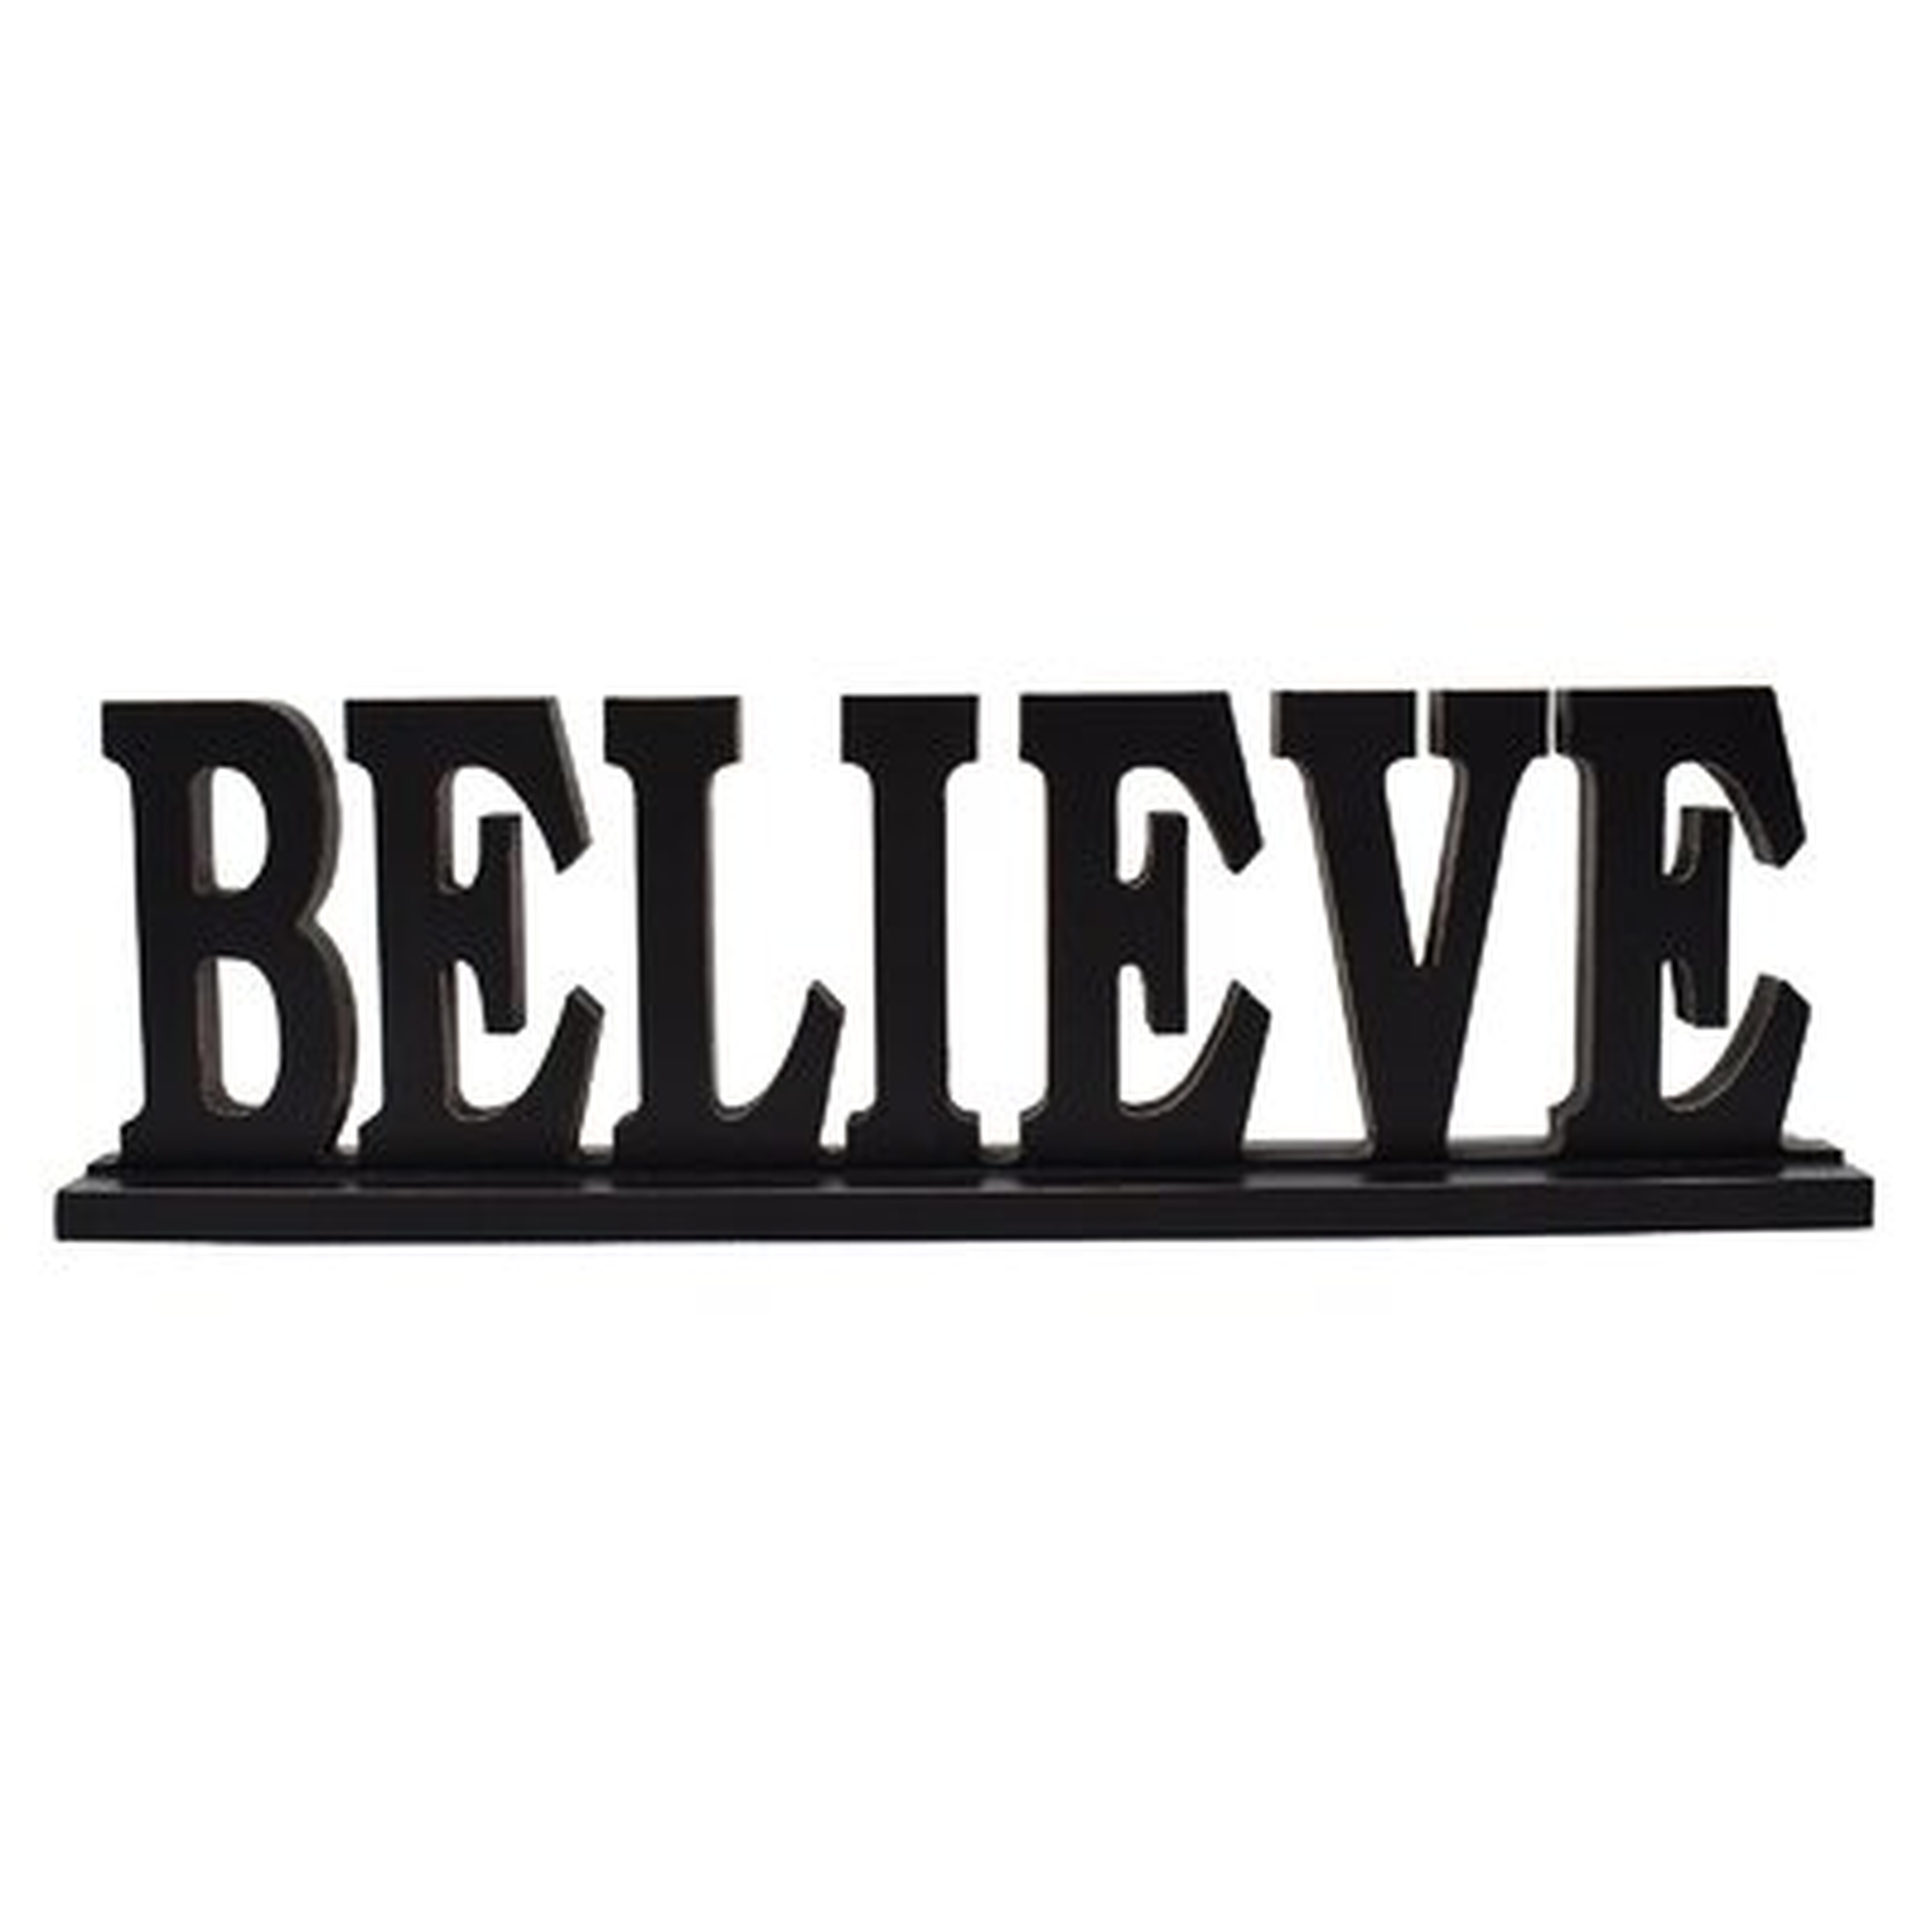 Rustic Wood Believe Letter Sign Free Standing Believe Word Sign Decor Decorative Table Top Word Sign - Wayfair